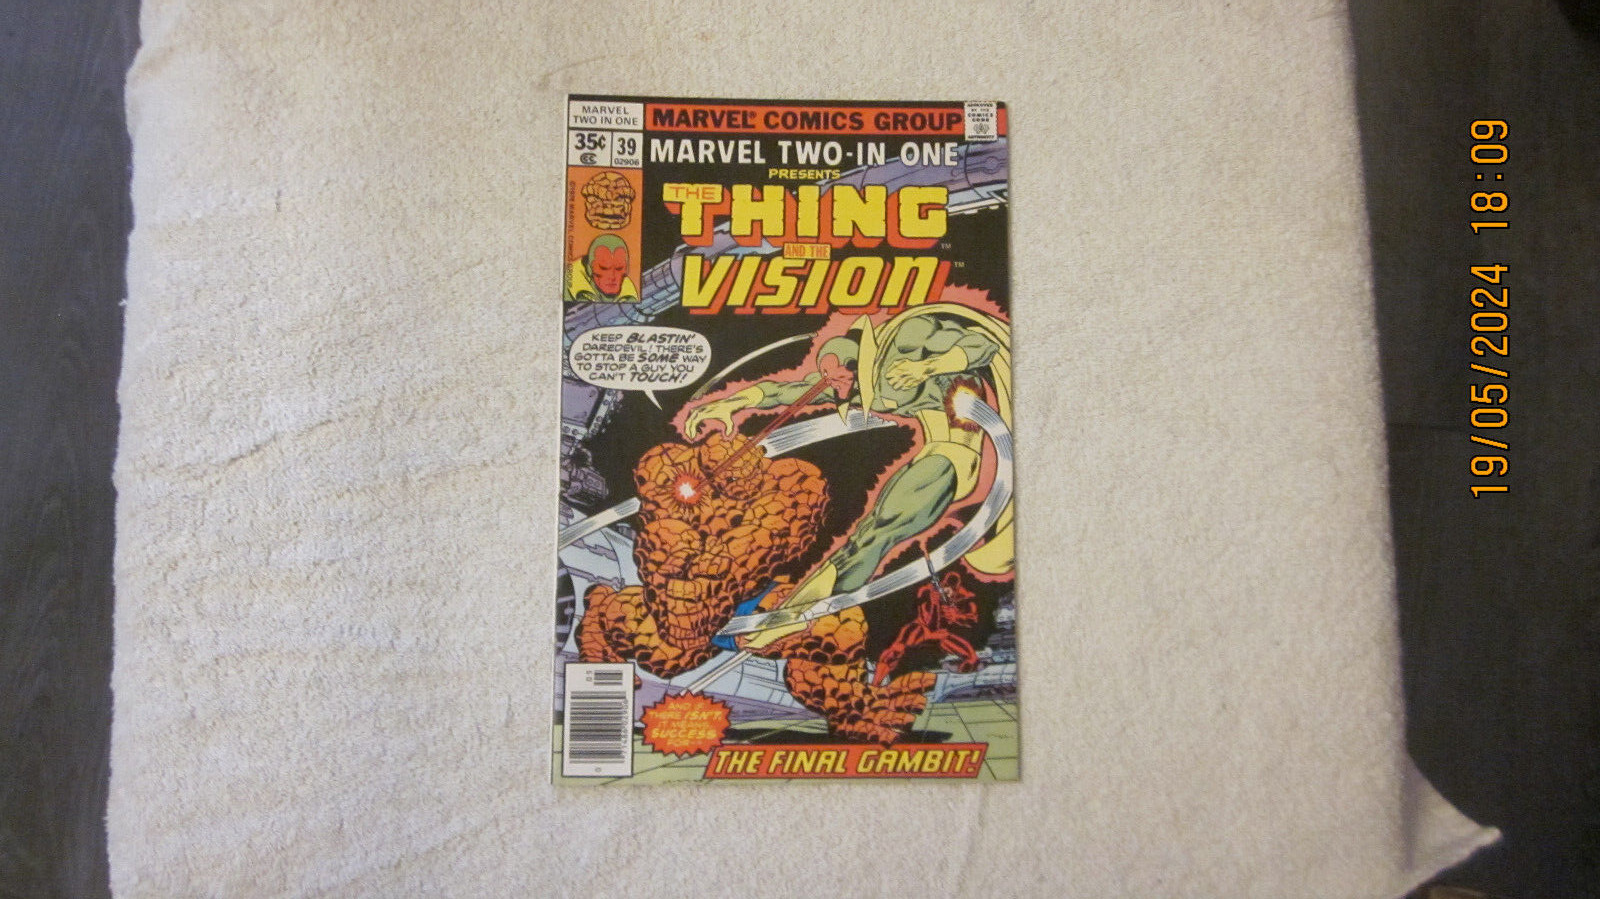 VINTAGE MARVEL COMICS MARVEL TWO-IN-ONE #39 THE THING AND VISION NM 9.4